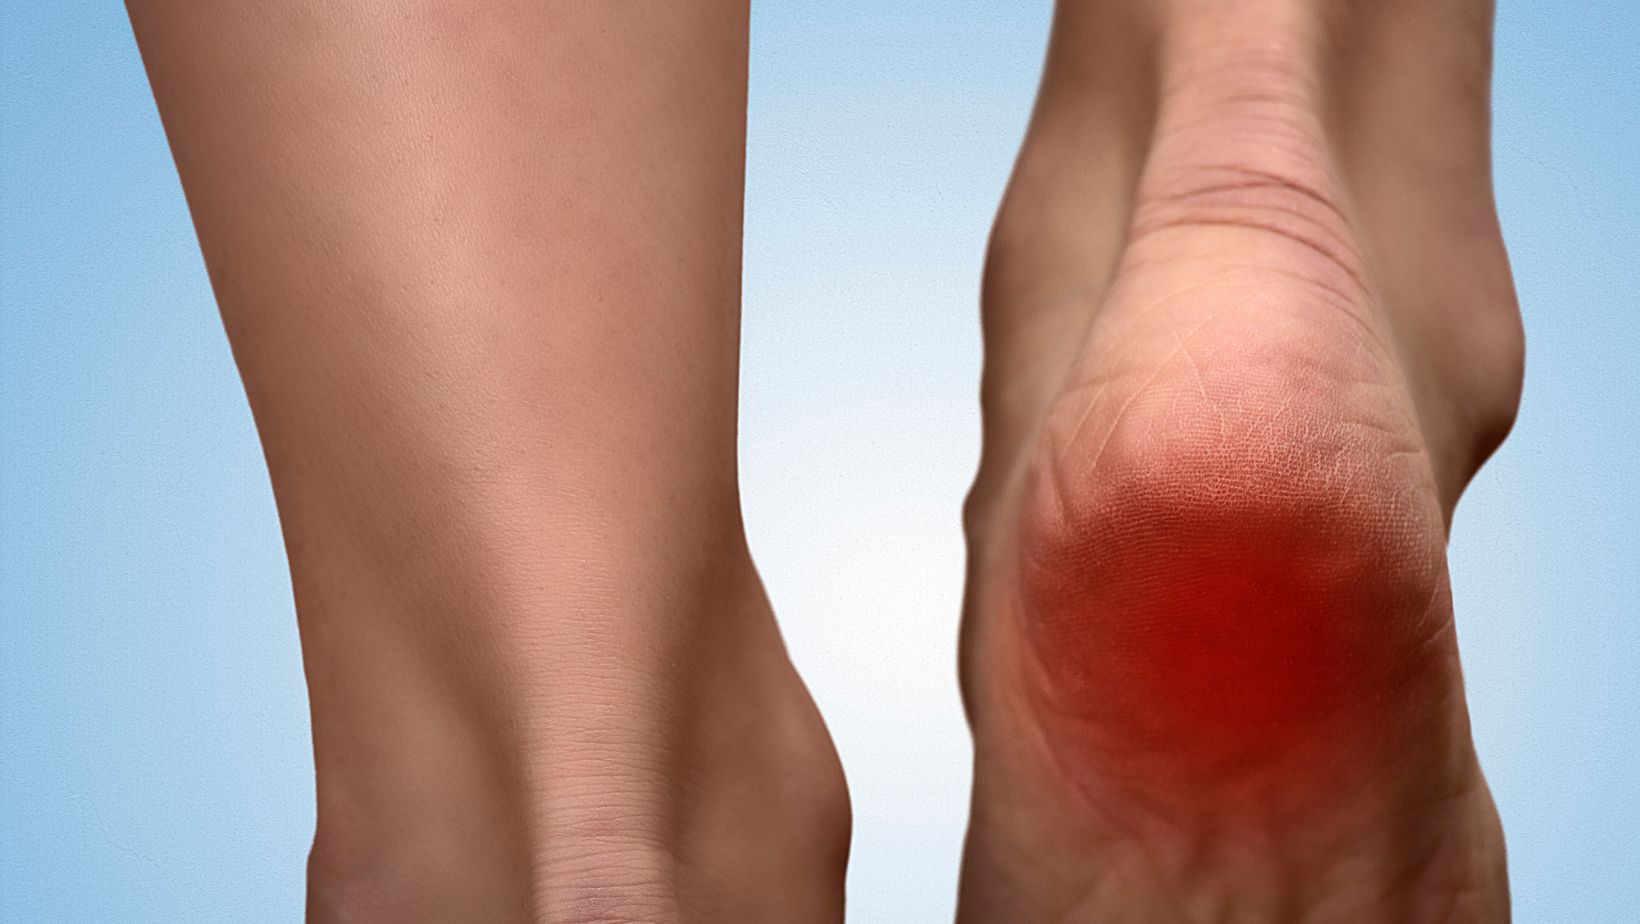 heel pain and cancer relation